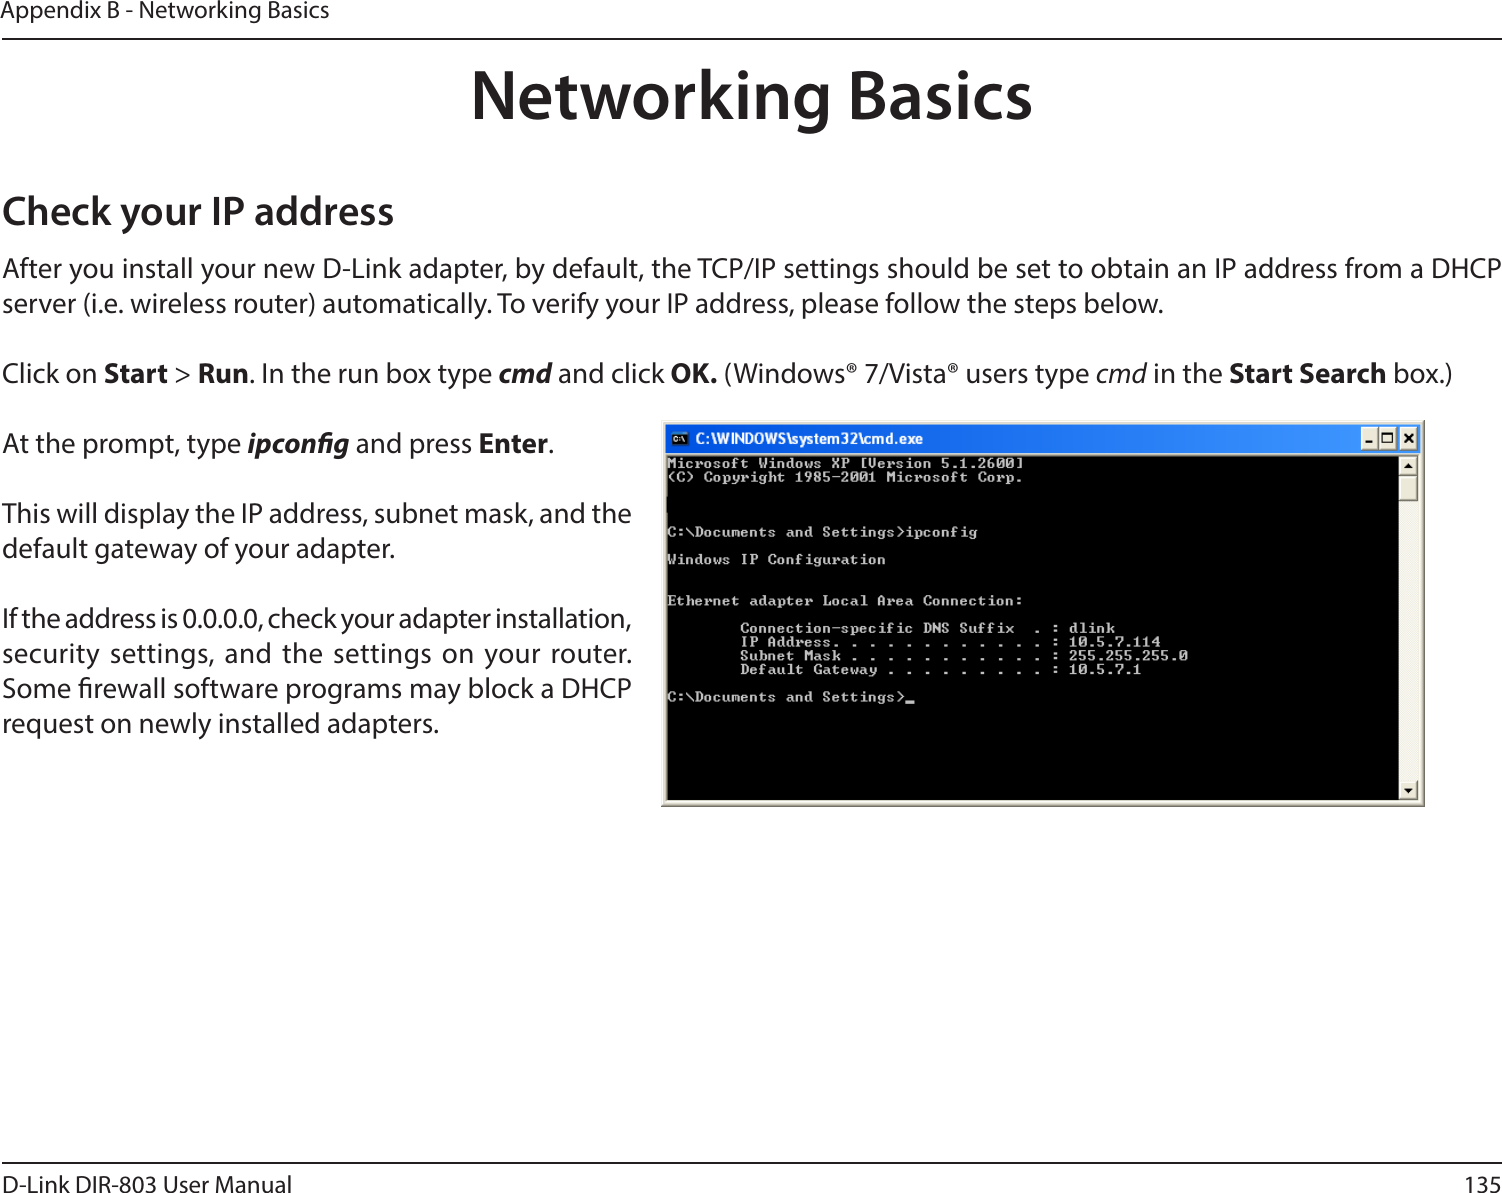 135D-Link DIR-803 User ManualAppendix B - Networking BasicsNetworking BasicsCheck your IP addressAfter you install your new D-Link adapter, by default, the TCP/IP settings should be set to obtain an IP address from a DHCP server (i.e. wireless router) automatically. To verify your IP address, please follow the steps below.Click on Start &gt; Run. In the run box type cmd and click OK. (Windows® 7/Vista® users type cmd in the Start Search box.)At the prompt, type ipcong and press Enter.This will display the IP address, subnet mask, and the default gateway of your adapter.If the address is 0.0.0.0, check your adapter installation, security settings, and the settings on your router. Some rewall software programs may block a DHCP request on newly installed adapters. 